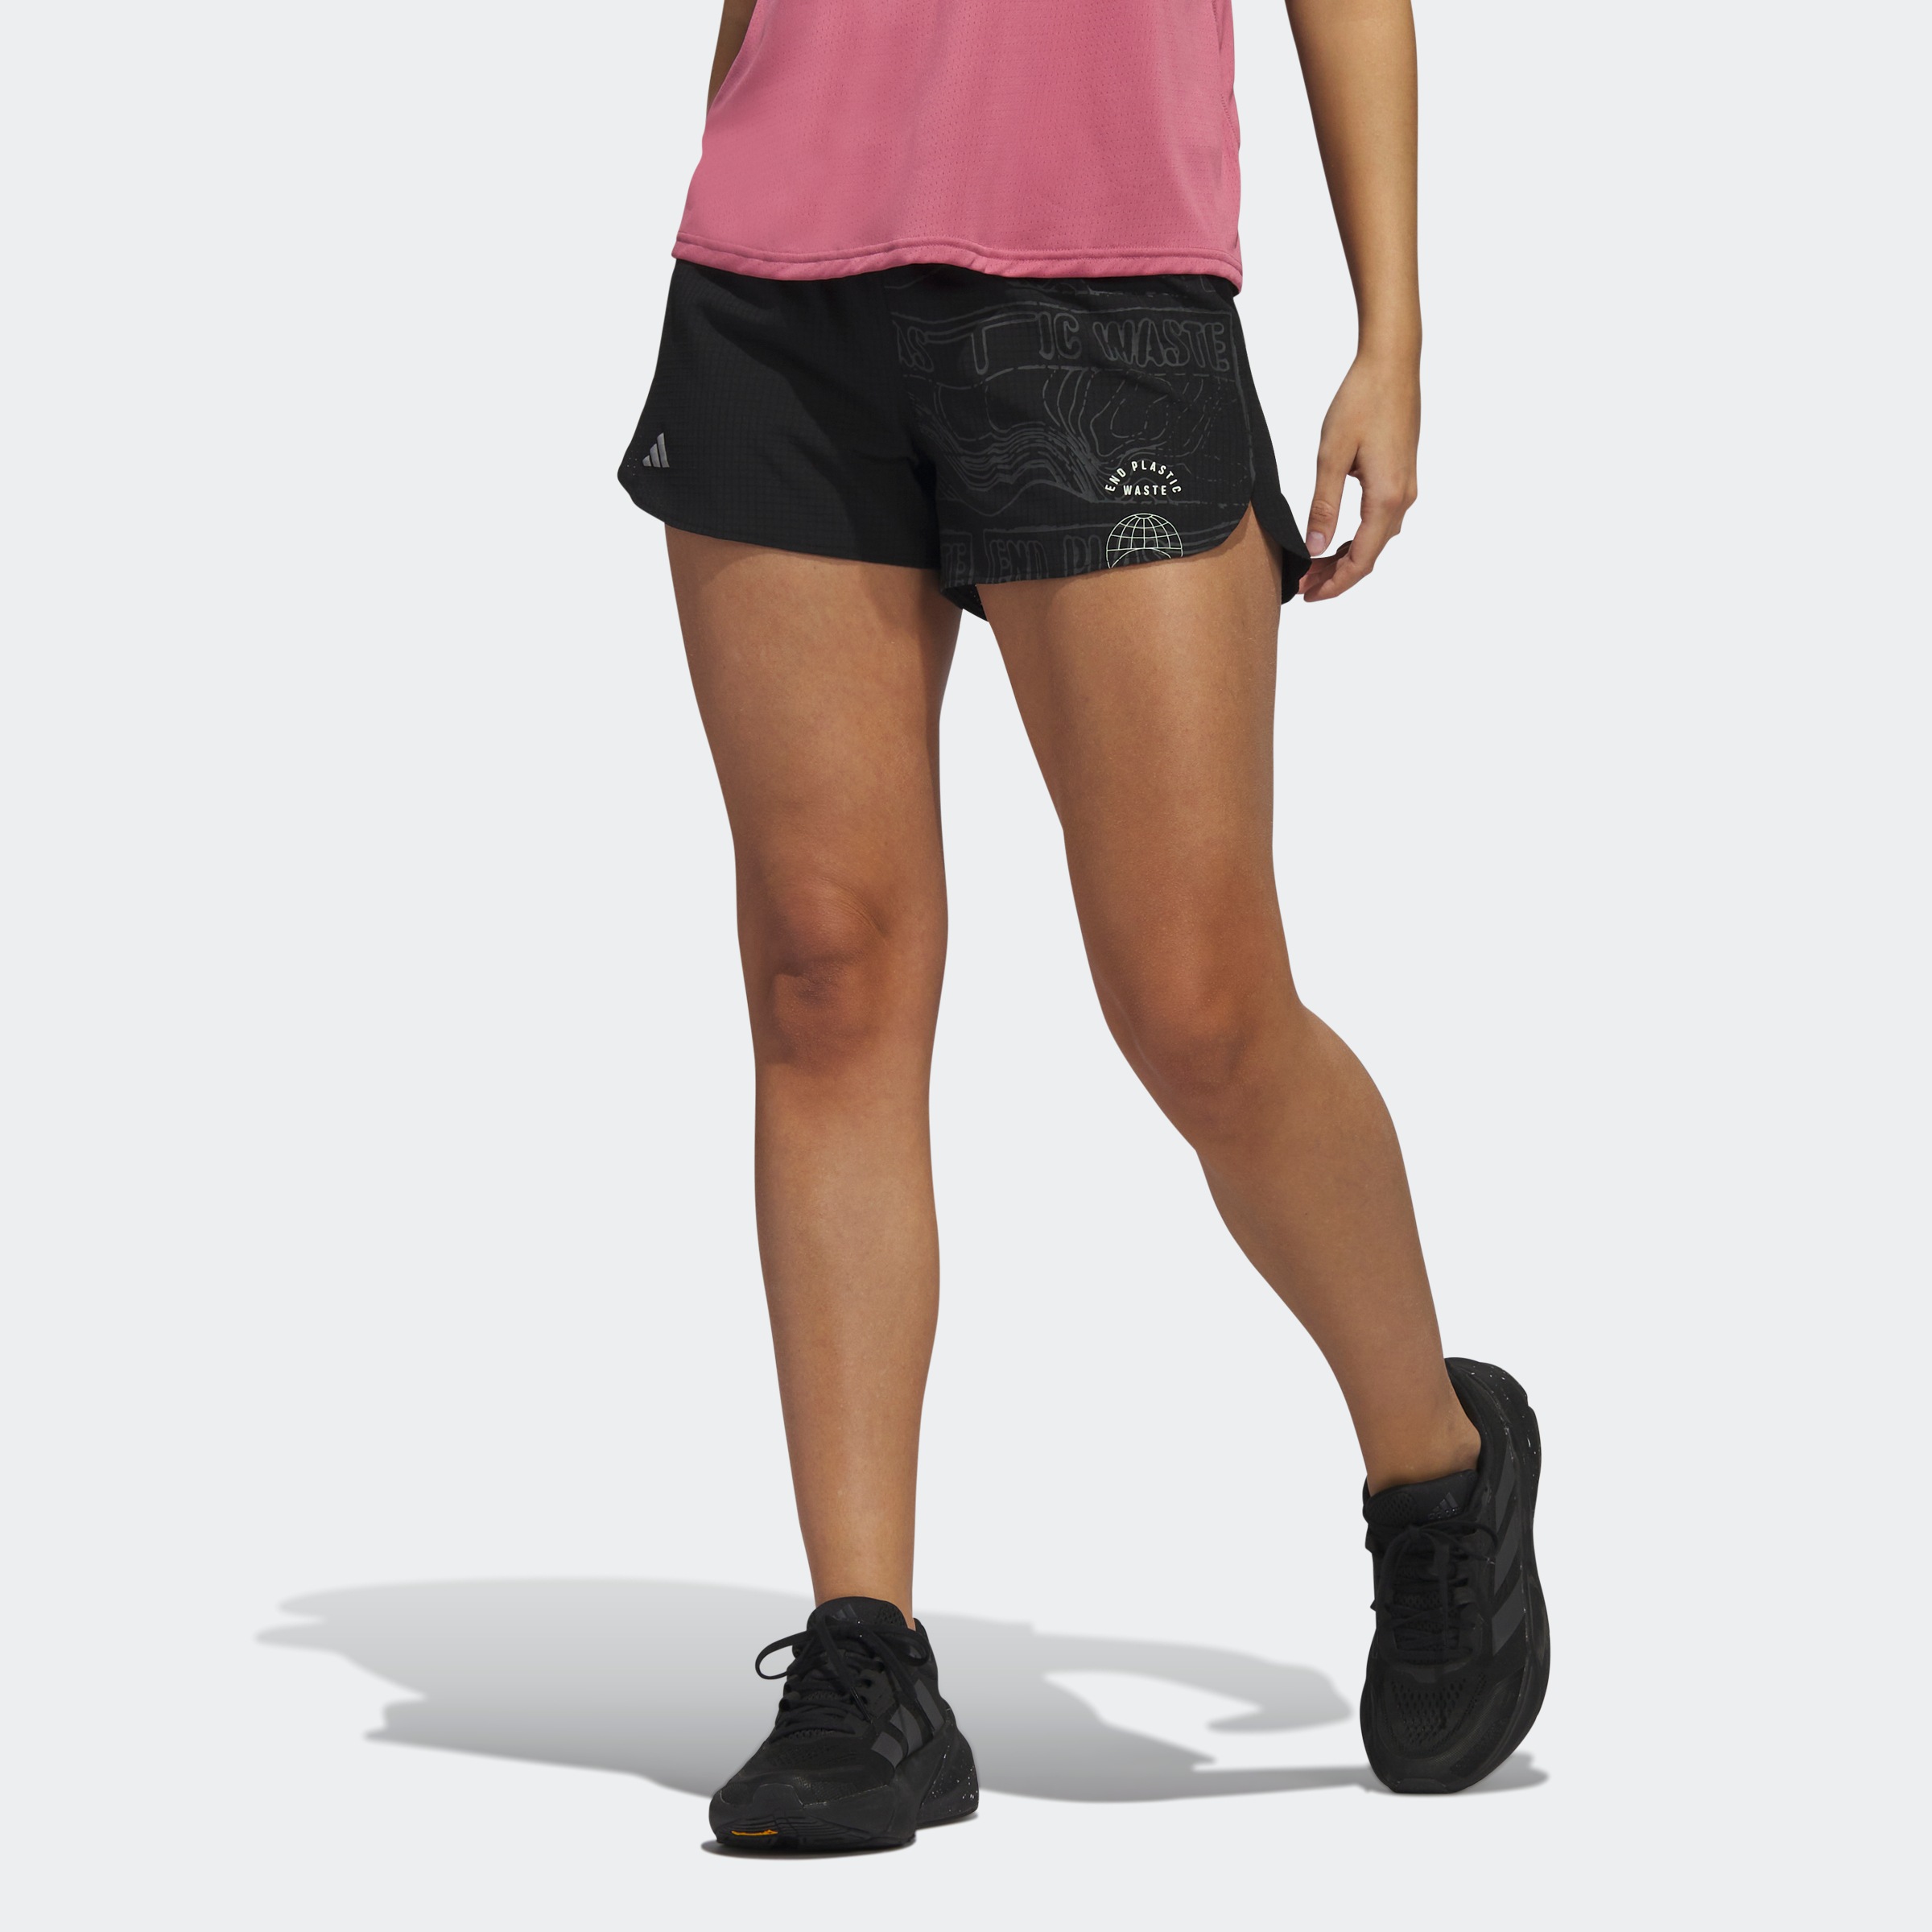 Performance adidas THE (1 Laufshorts »RUN bei ♕ FOR SHORTS«, tlg.) OCEANS